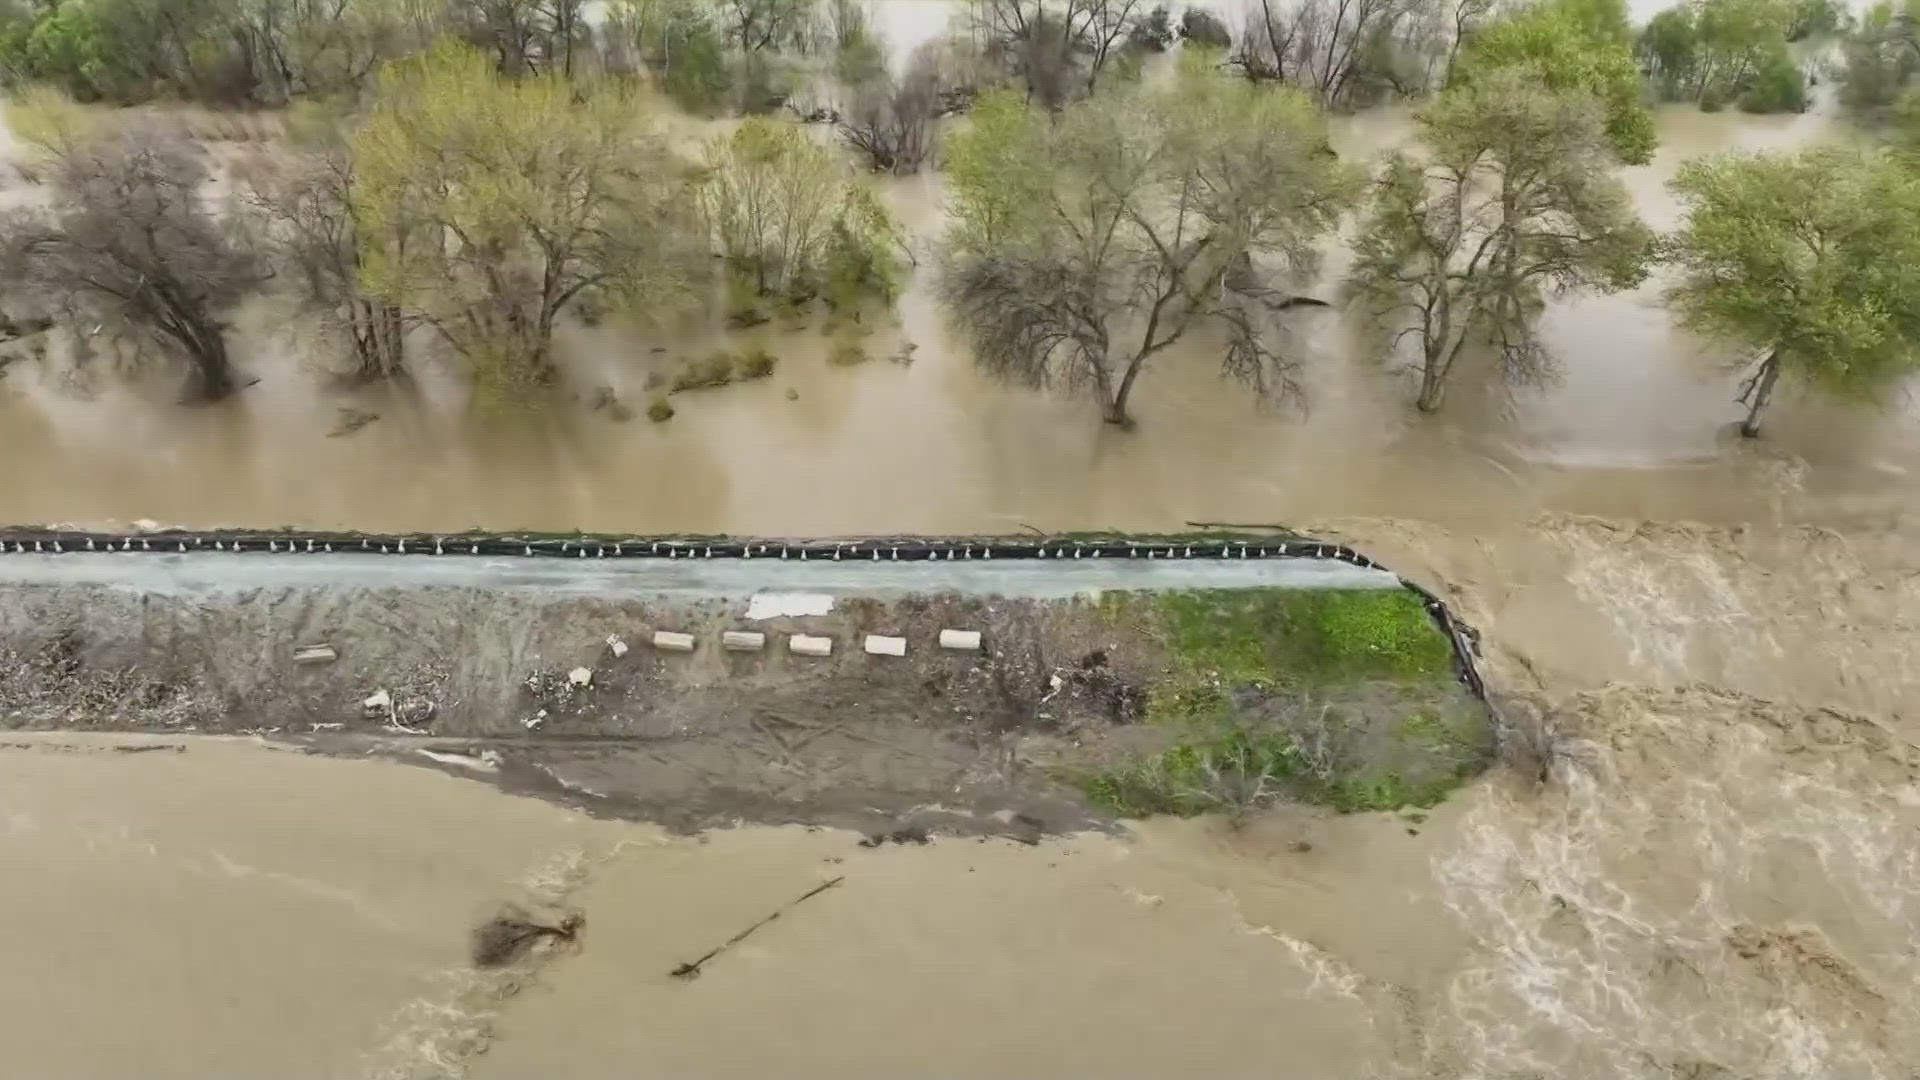 Officials are racing against the clock to place a temporary fix on a compromised part of a critical levee in California.